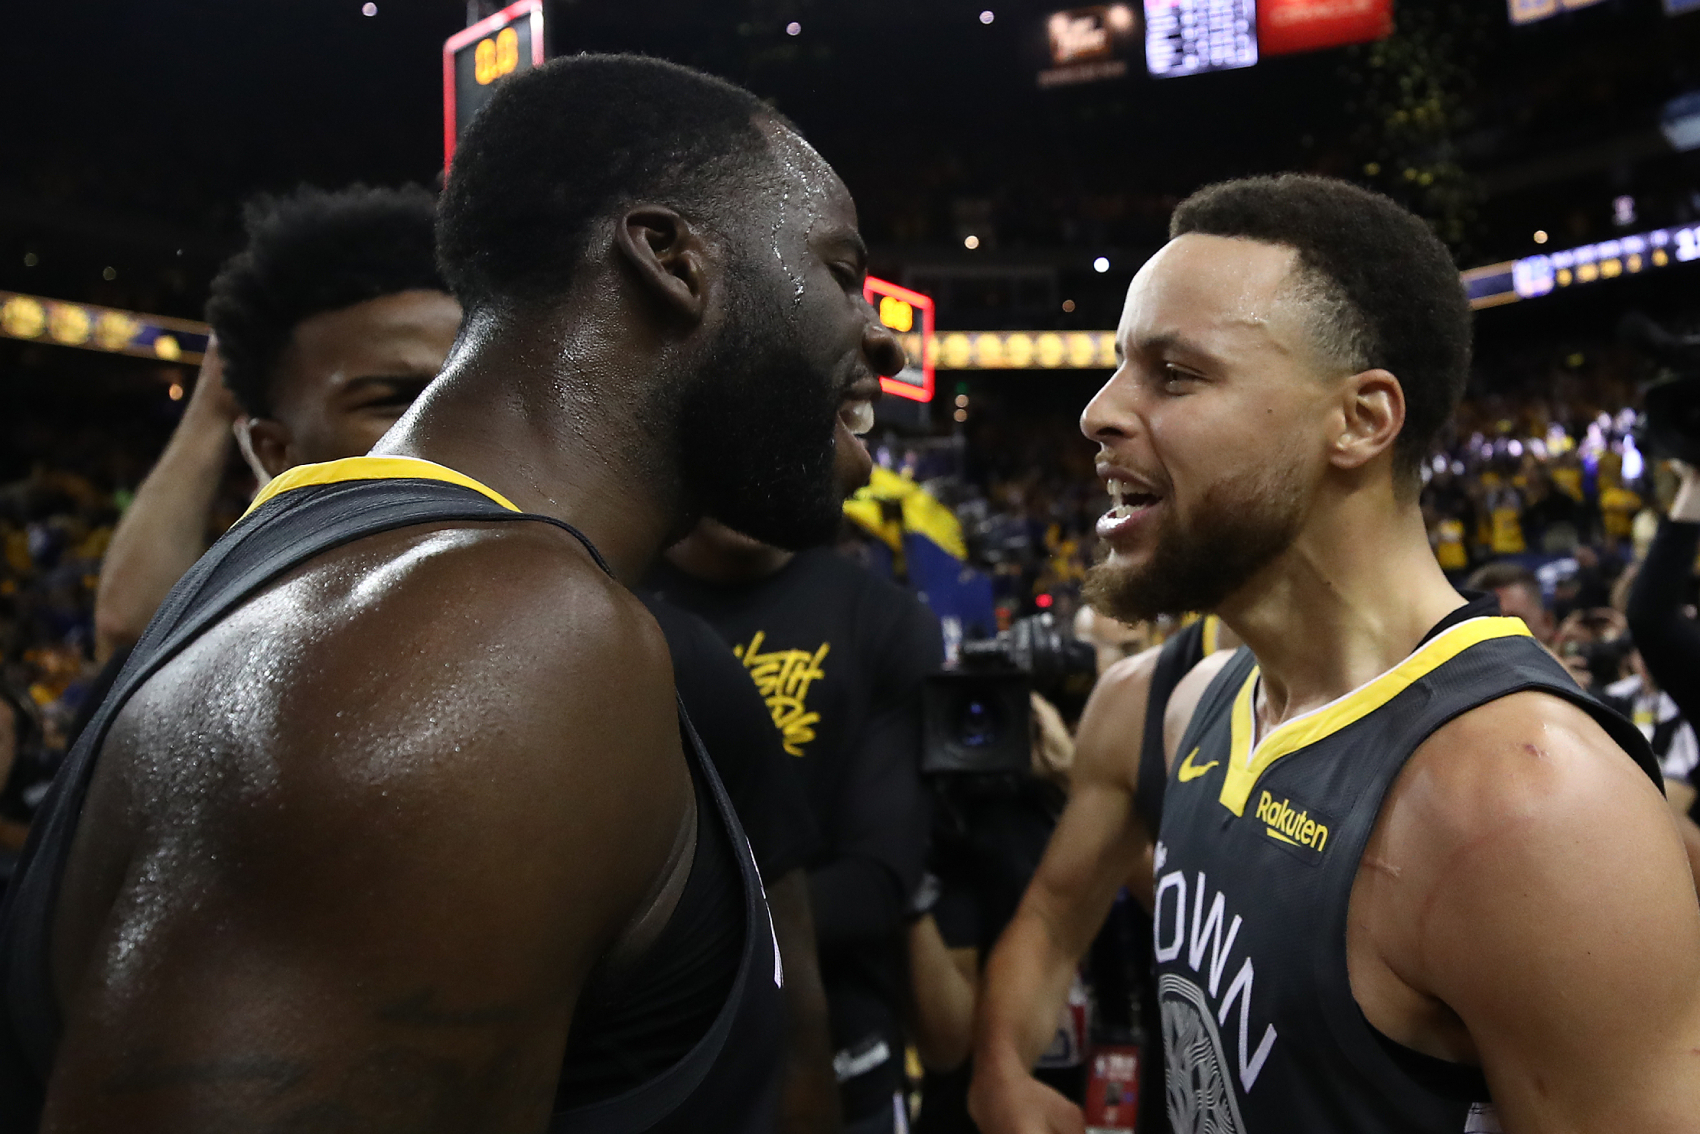 Like the Golden State Warriors as a team last season, Draymond Green had a down year. His teammate Stephen Curry has a strong message, though.